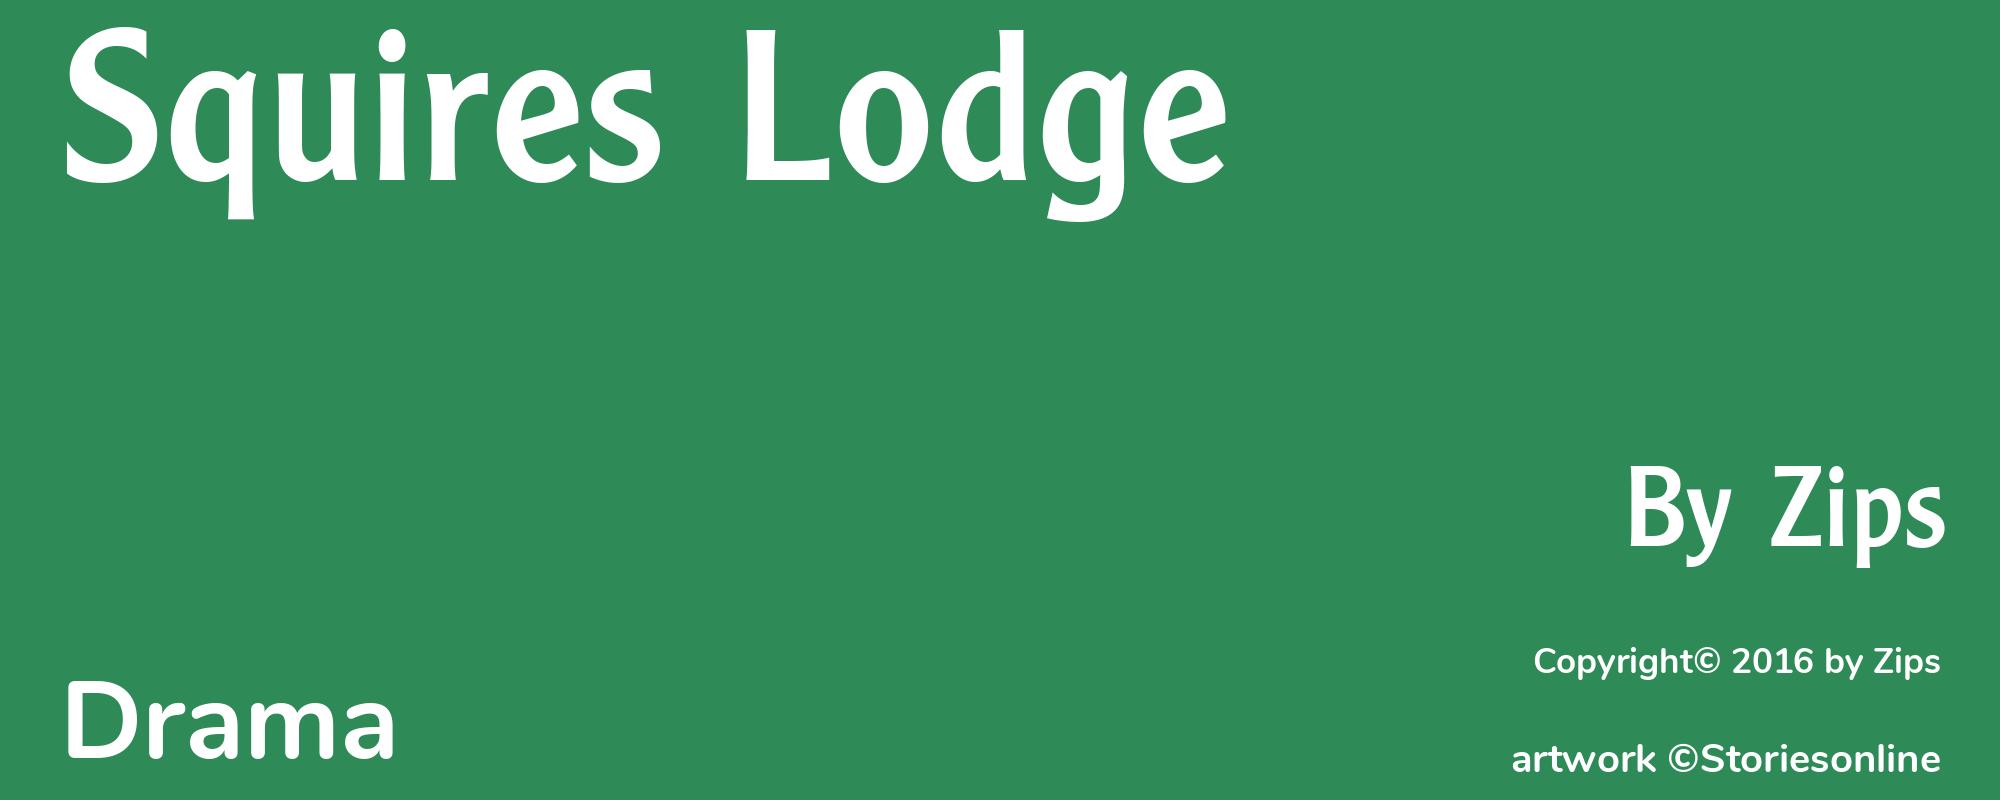 Squires Lodge - Cover